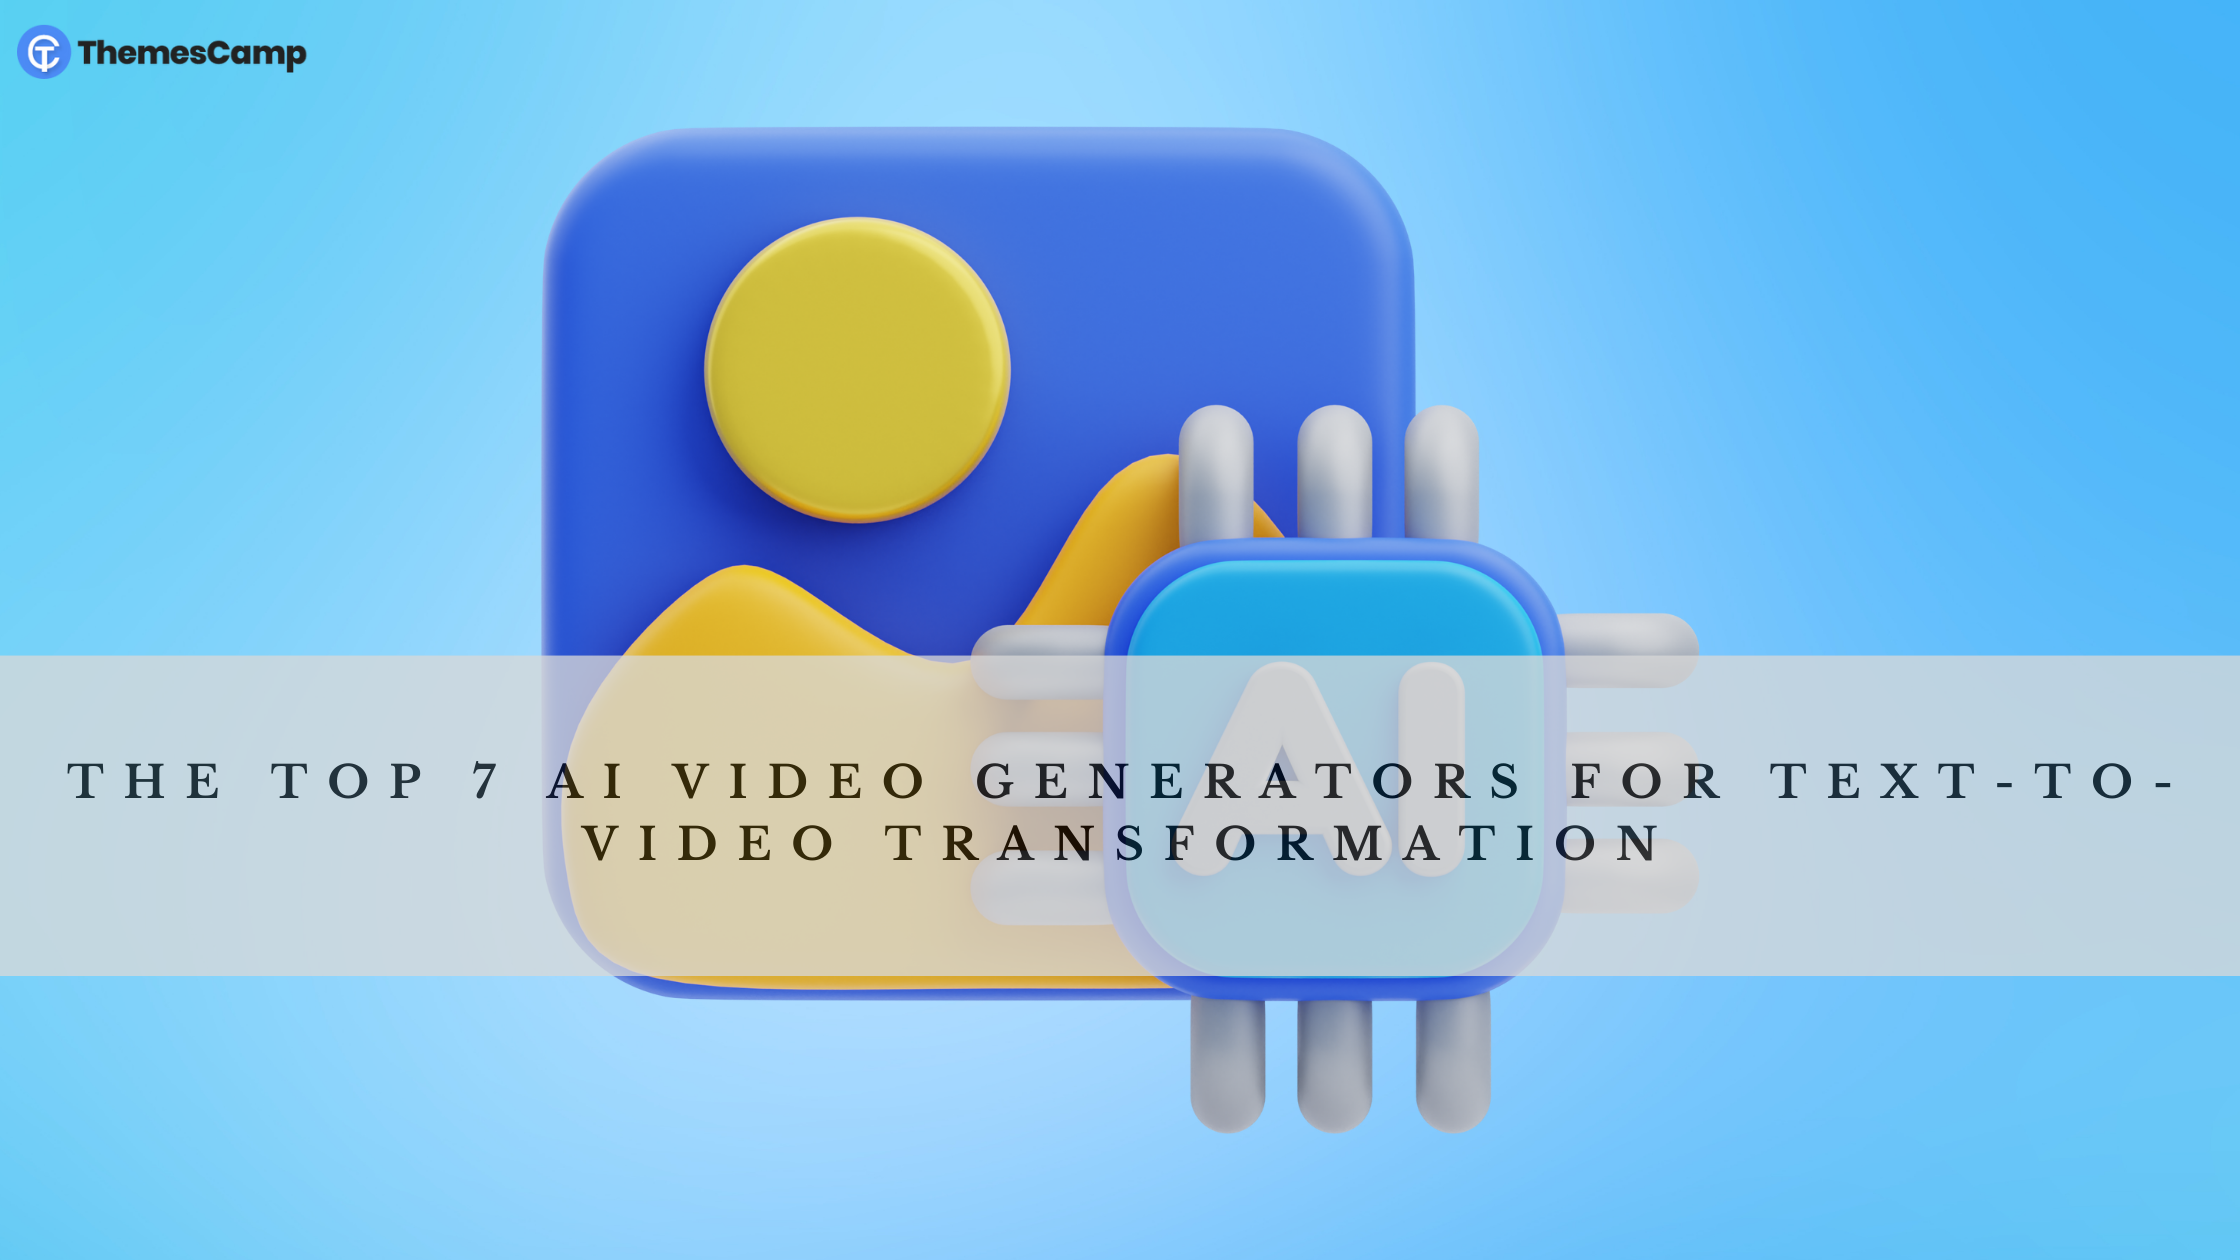 Streamlining Video Creation: The Top 7 AI Video Generators for Effortless Text-to-Video Transformation